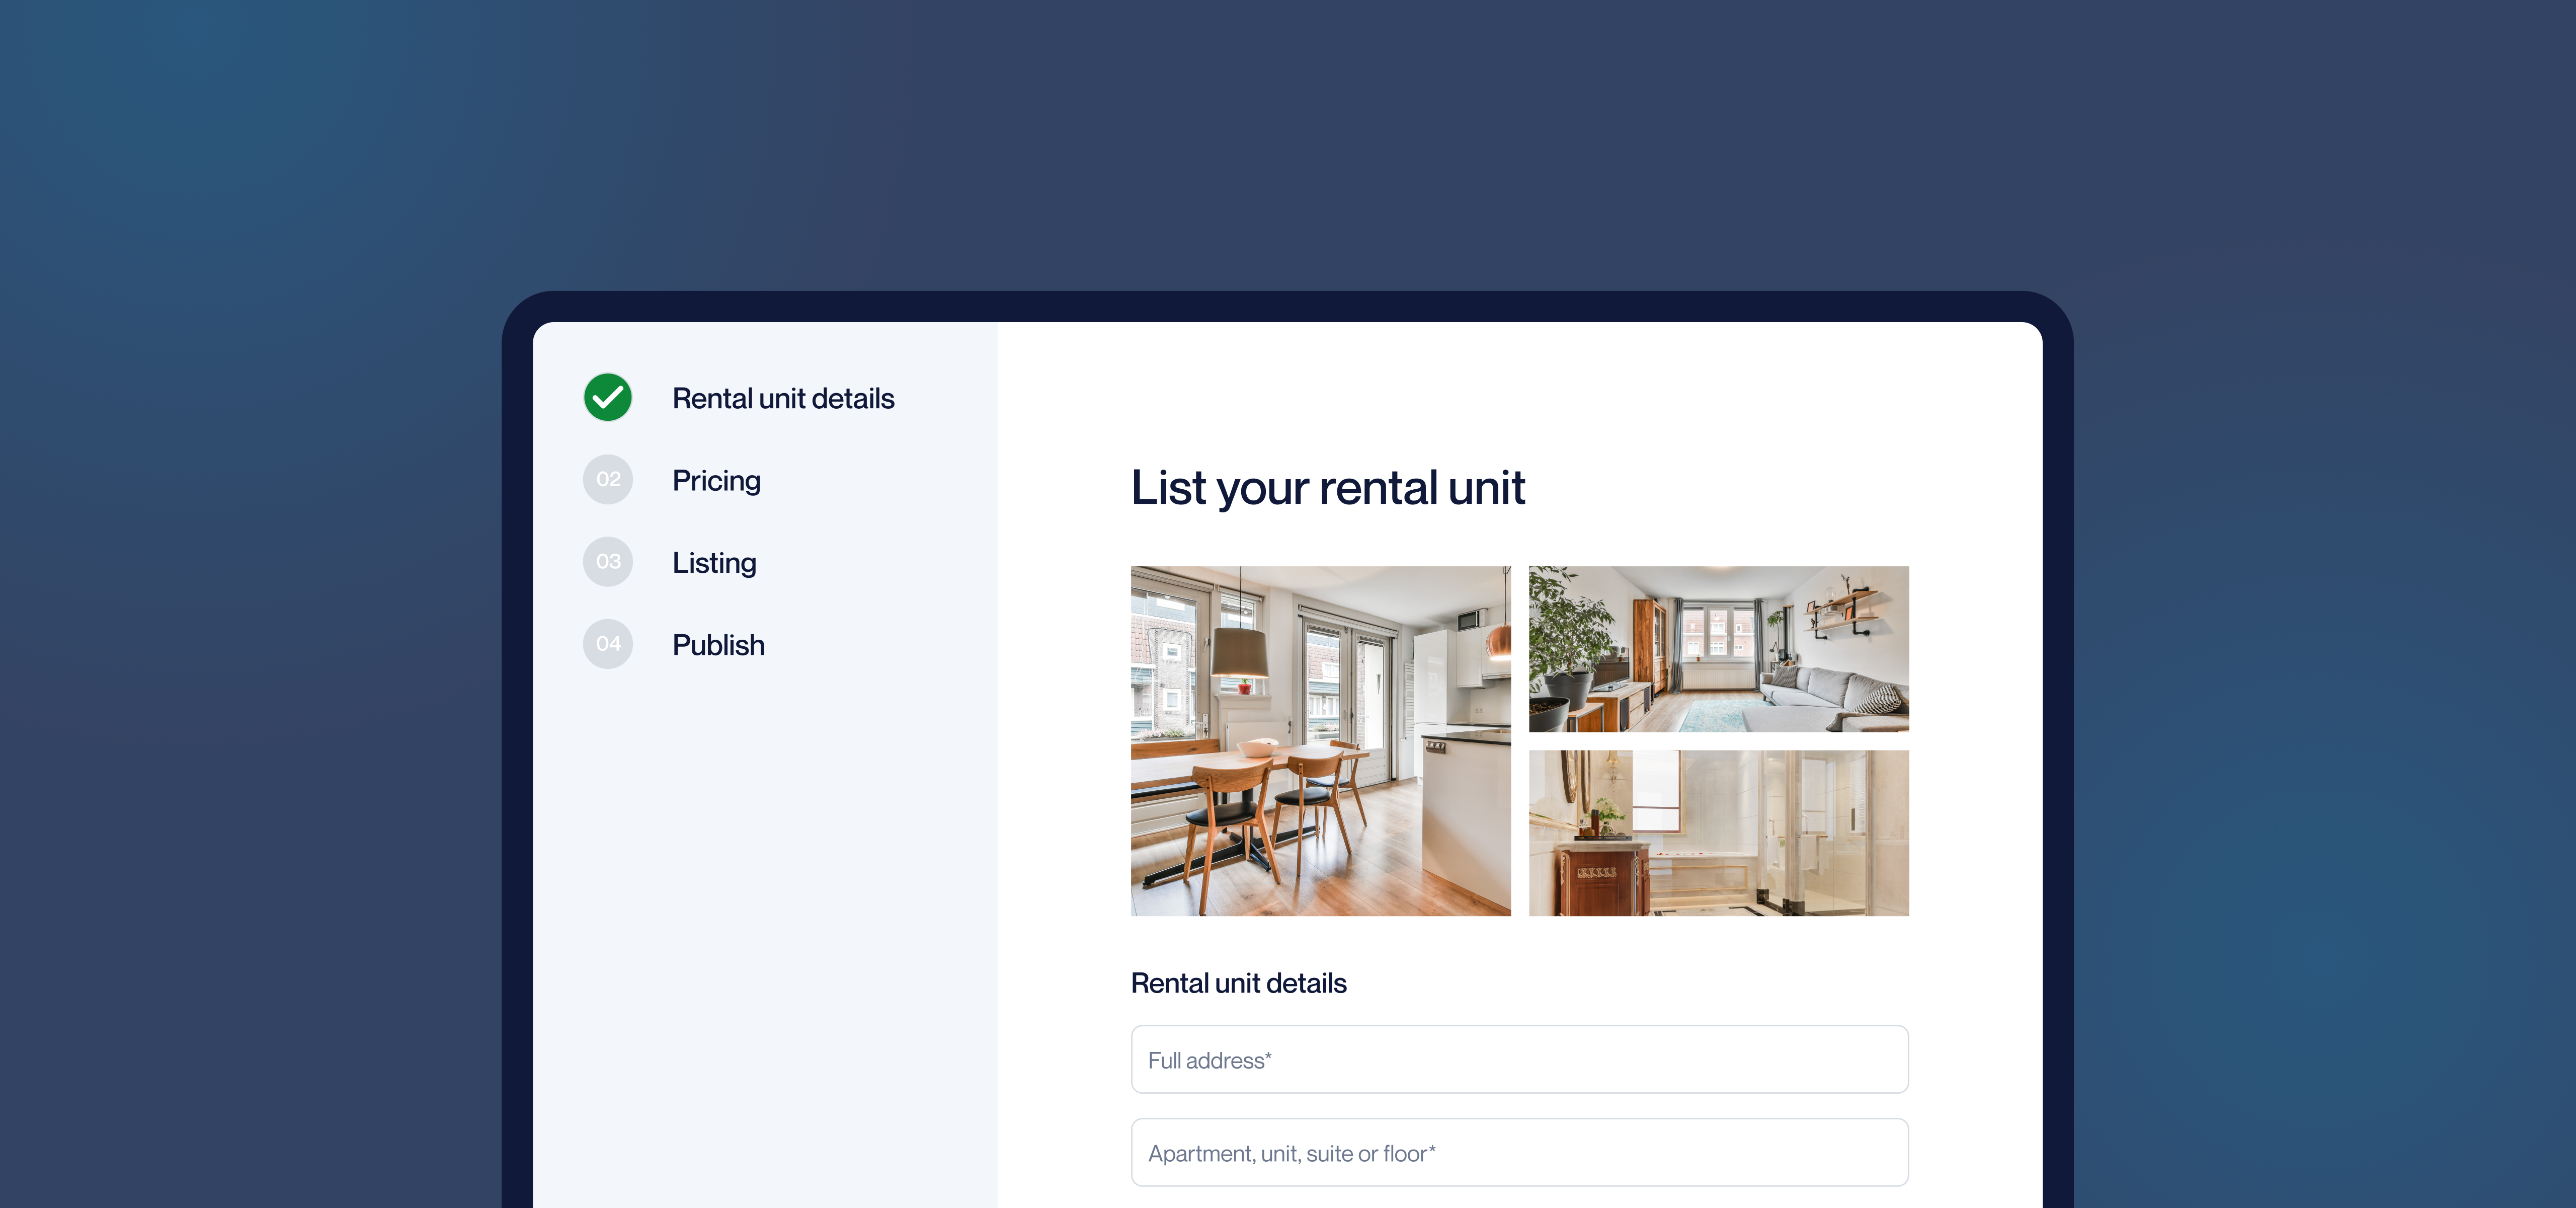 A screenshot of the first step in creating an online rental listing. There are photos of an apartment's kitchen, bedroom, and bathroom, empty fields to fill in rental unit details underneath, and an online navigation of menu items to one side, with "Rental unit details" checked off.